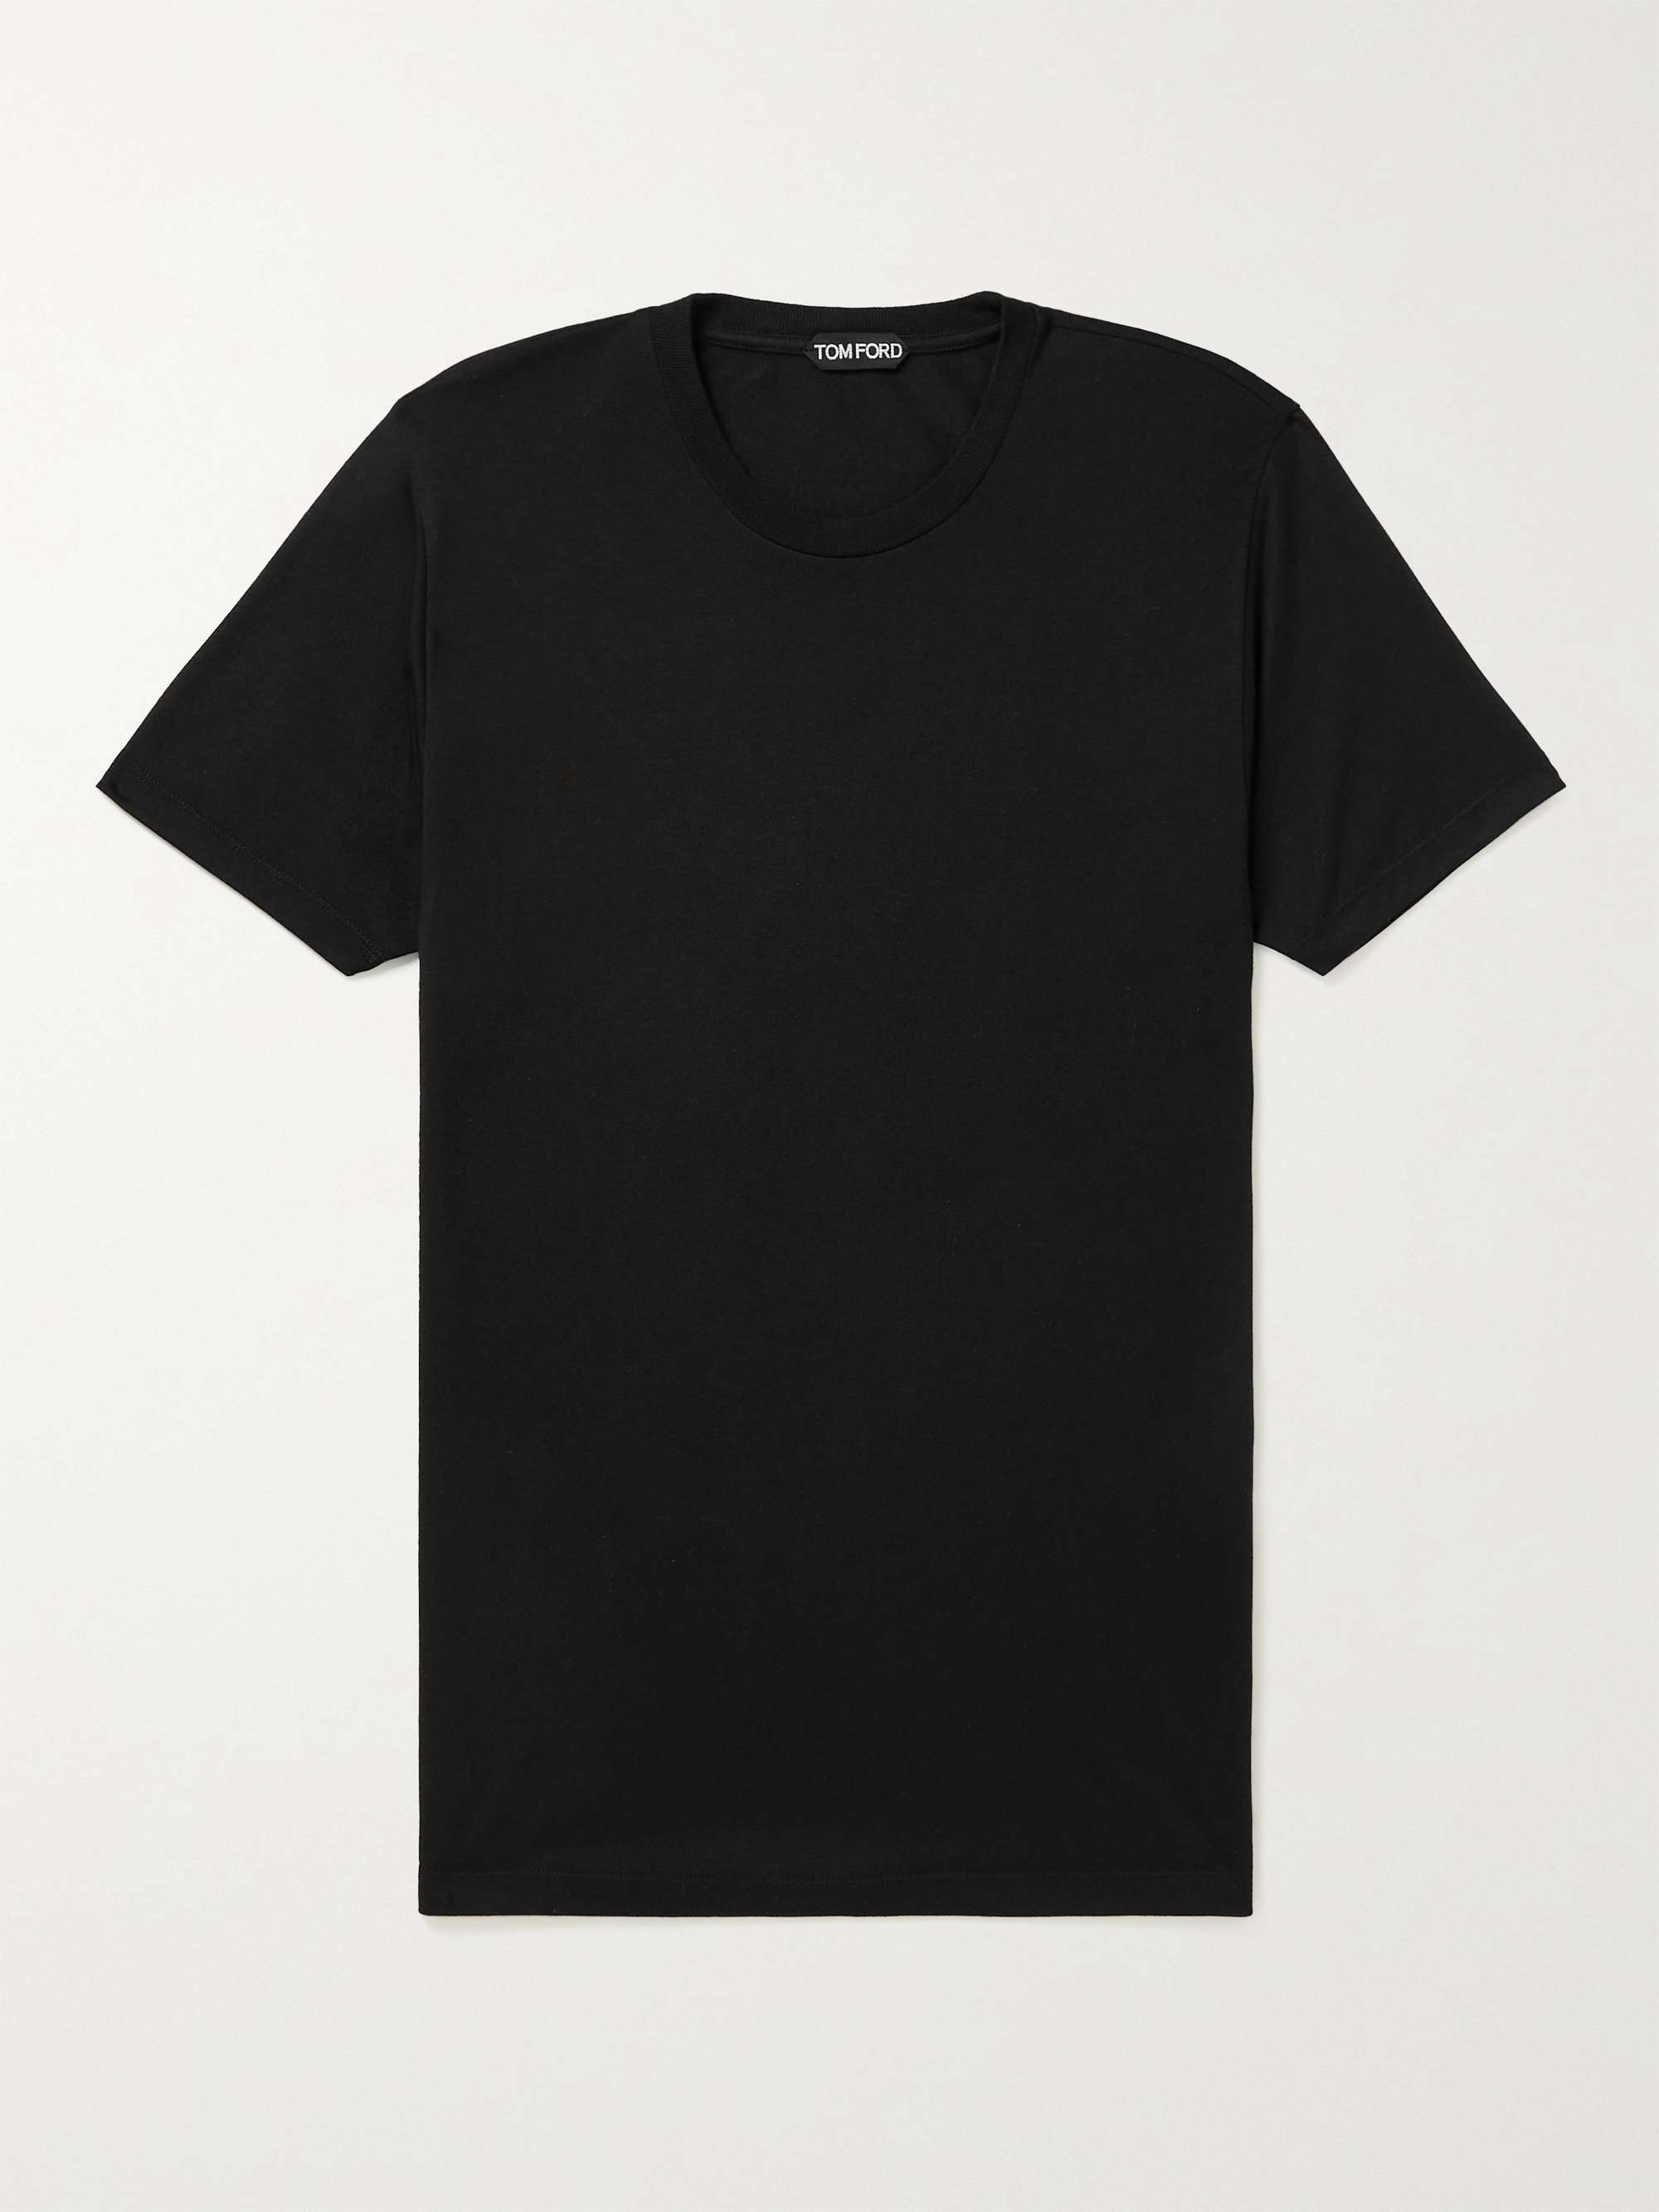 TOM FORD Jersey T-Shirt